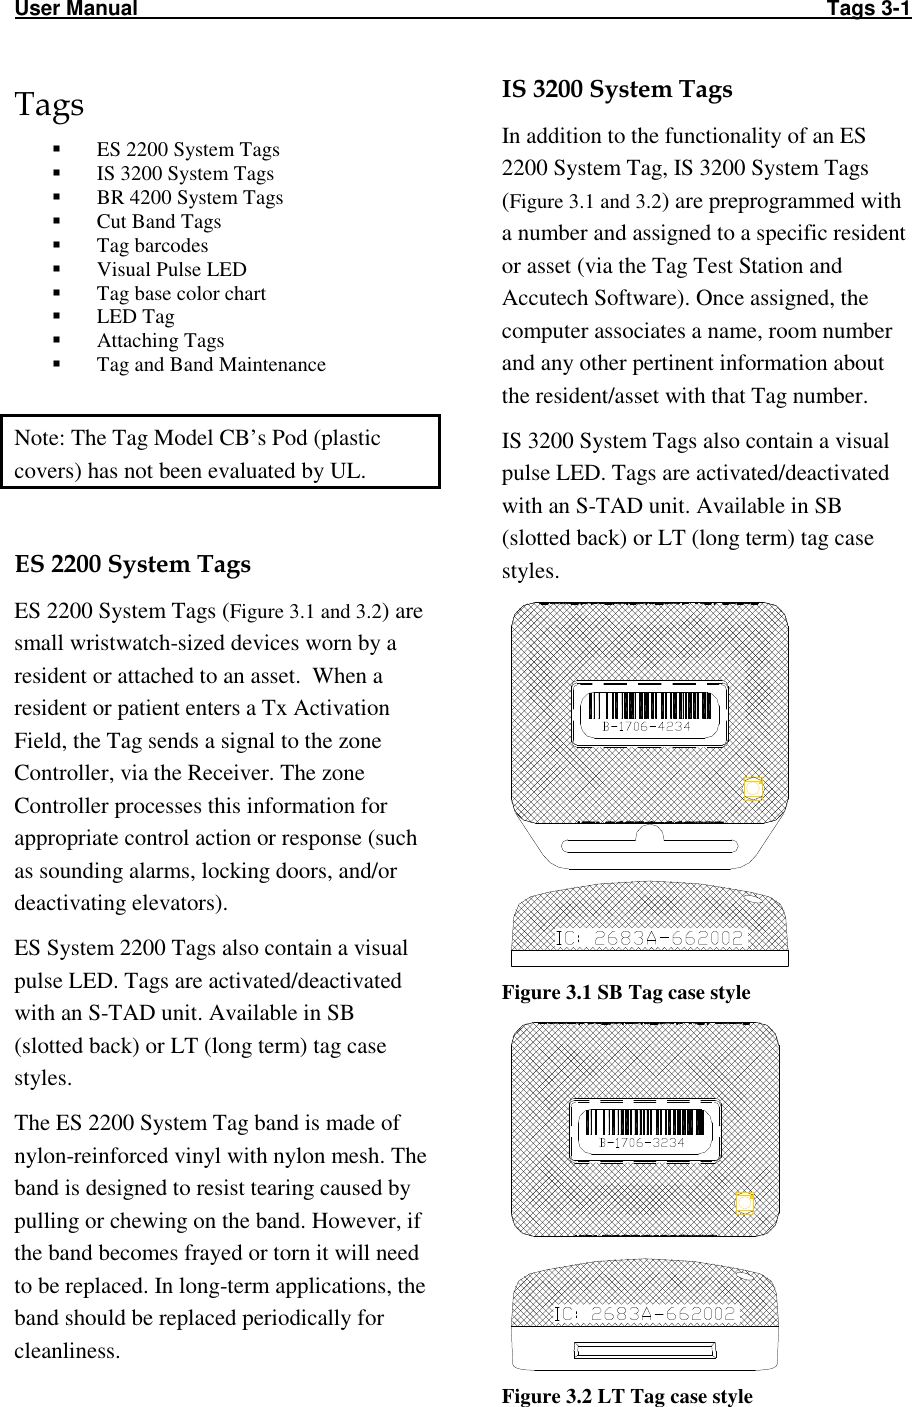 User Manual                                                                                                                       Tags 3-1 Tags  ES 2200 System Tags  IS 3200 System Tags  BR 4200 System Tags  Cut Band Tags  Tag barcodes  Visual Pulse LED  Tag base color chart  LED Tag  Attaching Tags  Tag and Band Maintenance  Note: The Tag Model CB’s Pod (plastic covers) has not been evaluated by UL.  ES 2200 System Tags ES 2200 System Tags (Figure 3.1 and 3.2) are small wristwatch-sized devices worn by a resident or attached to an asset.  When a resident or patient enters a Tx Activation Field, the Tag sends a signal to the zone Controller, via the Receiver. The zone Controller processes this information for appropriate control action or response (such as sounding alarms, locking doors, and/or deactivating elevators).  ES System 2200 Tags also contain a visual pulse LED. Tags are activated/deactivated with an S-TAD unit. Available in SB (slotted back) or LT (long term) tag case styles. The ES 2200 System Tag band is made of nylon-reinforced vinyl with nylon mesh. The band is designed to resist tearing caused by pulling or chewing on the band. However, if the band becomes frayed or torn it will need to be replaced. In long-term applications, the band should be replaced periodically for cleanliness.IS 3200 System Tags In addition to the functionality of an ES 2200 System Tag, IS 3200 System Tags (Figure 3.1 and 3.2) are preprogrammed with a number and assigned to a specific resident or asset (via the Tag Test Station and Accutech Software). Once assigned, the computer associates a name, room number and any other pertinent information about the resident/asset with that Tag number.  IS 3200 System Tags also contain a visual pulse LED. Tags are activated/deactivated with an S-TAD unit. Available in SB (slotted back) or LT (long term) tag case styles.  Figure 3.1 SB Tag case style  Figure 3.2 LT Tag case style